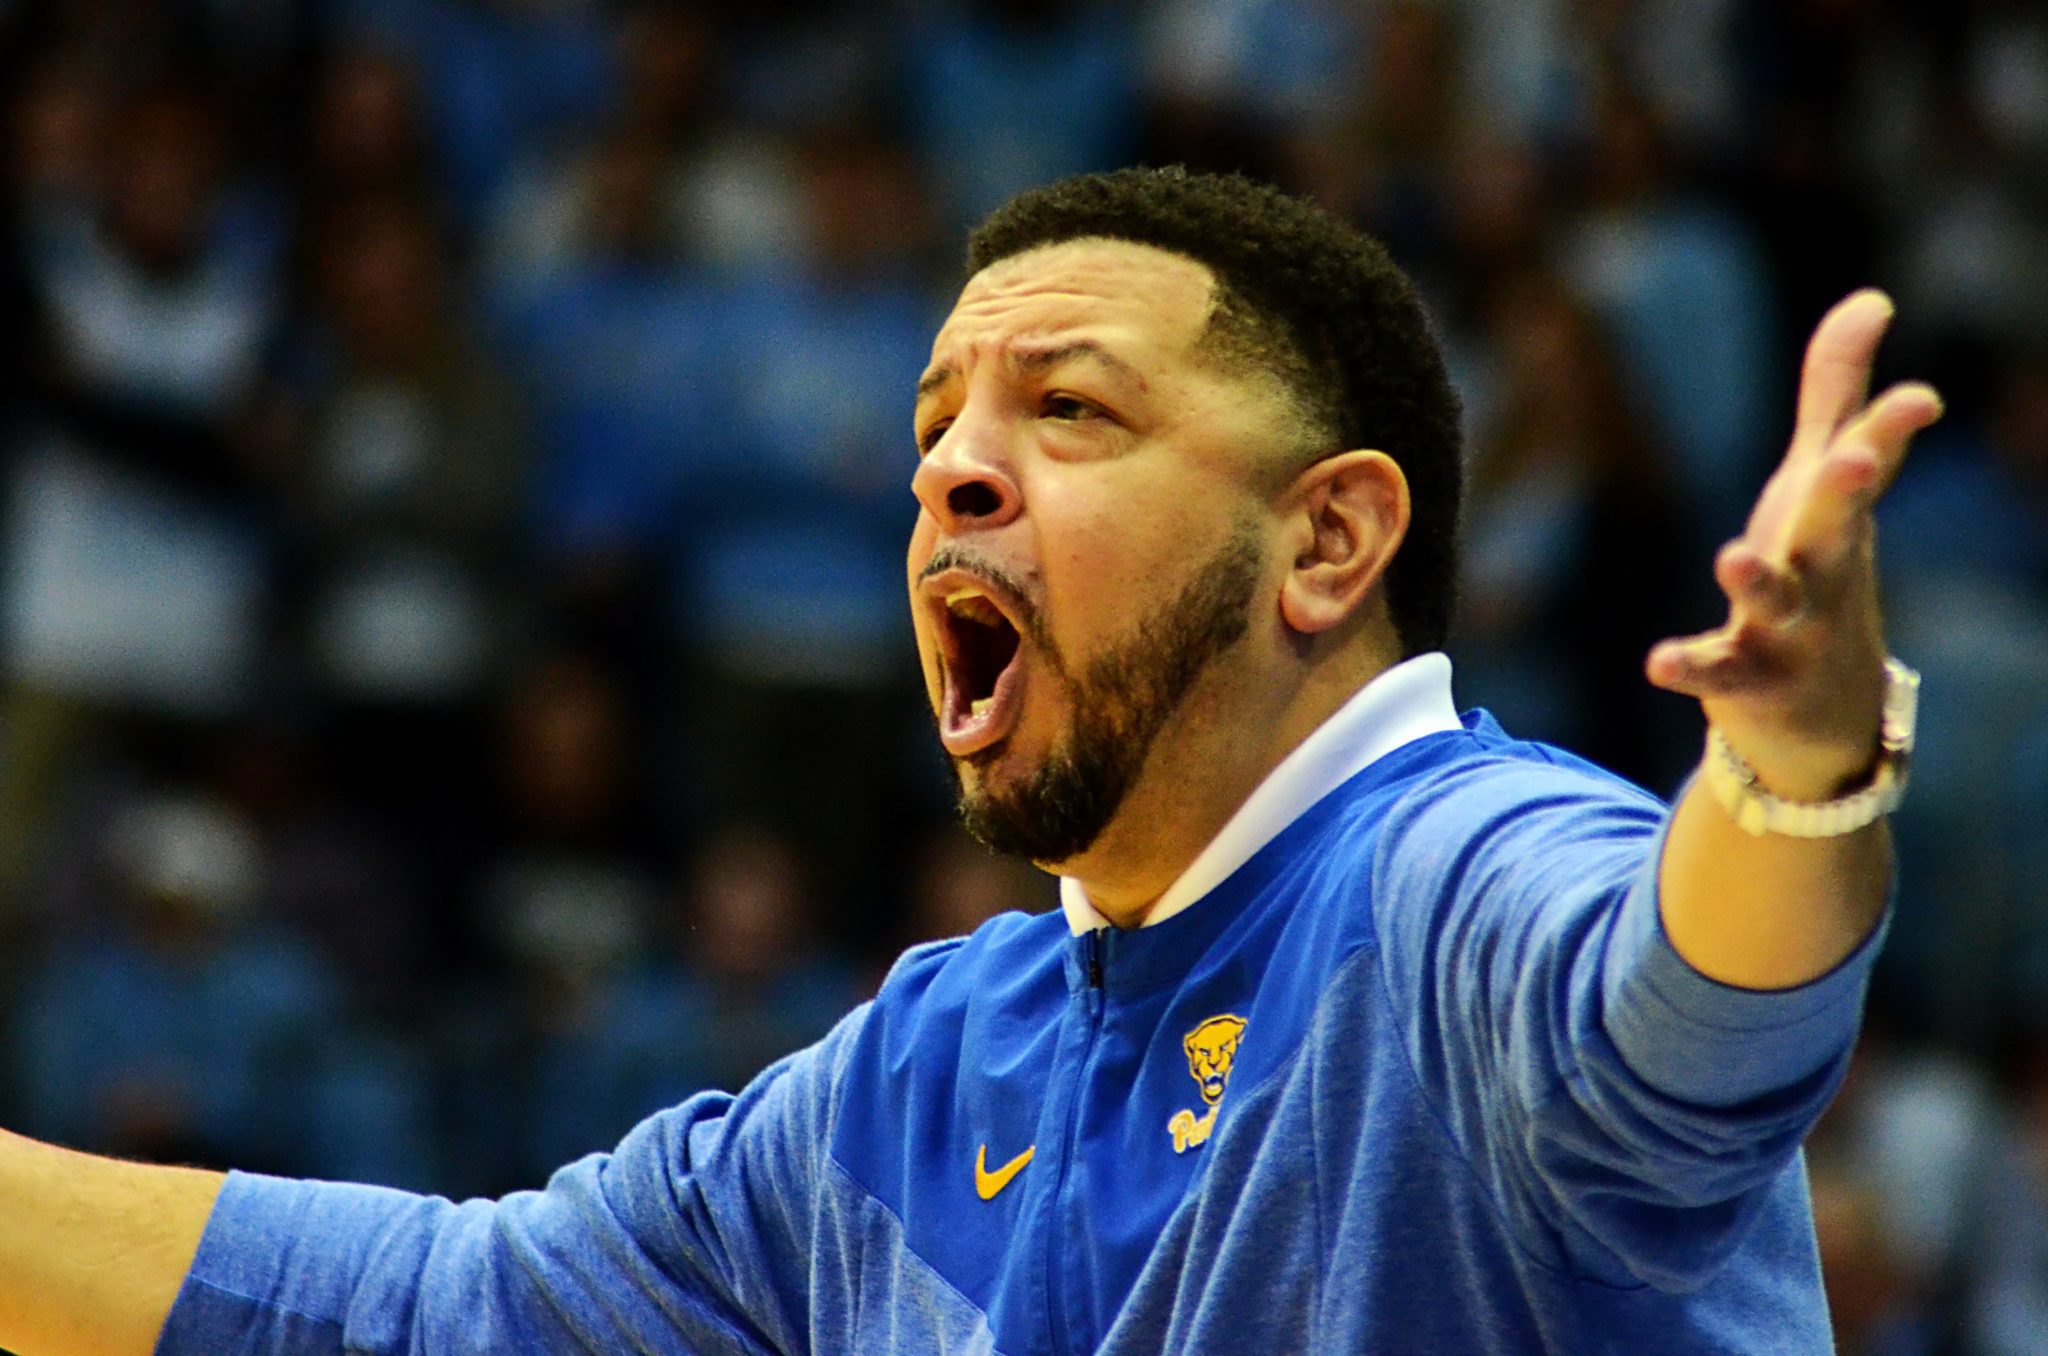 Jeff Capel as Pitt plays against North Carolina on Wednesday, Feb. 1, 2023 in Chapel Hill. (Mitchell Northam / Pittsburgh Sports Now)